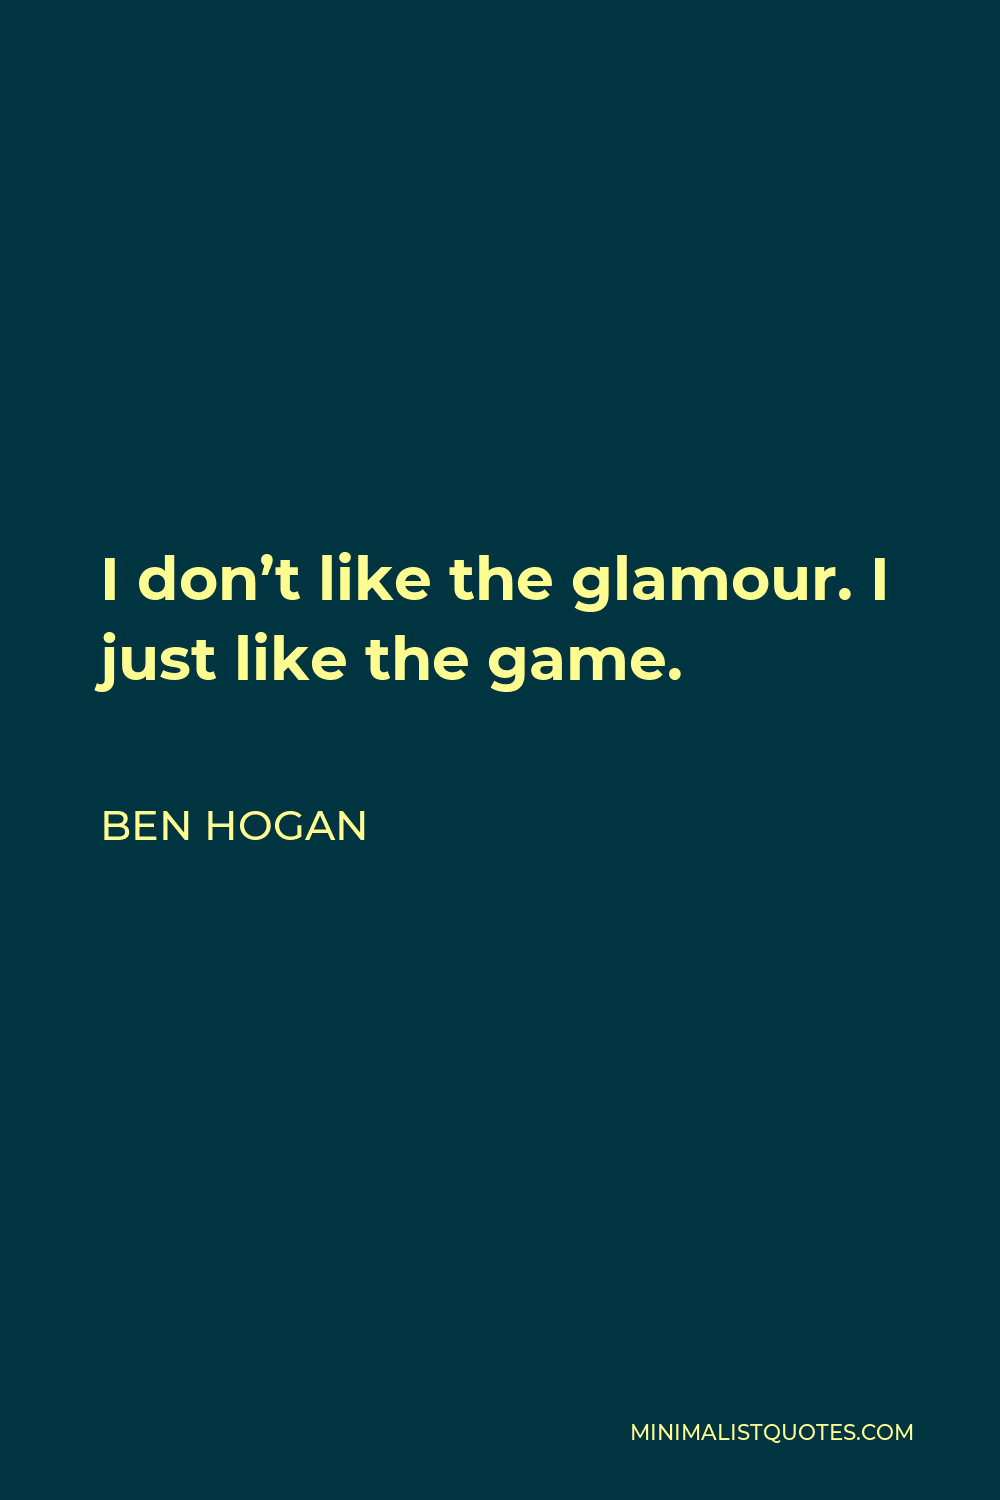 Ben Hogan Quote - I don’t like the glamour. I just like the game.